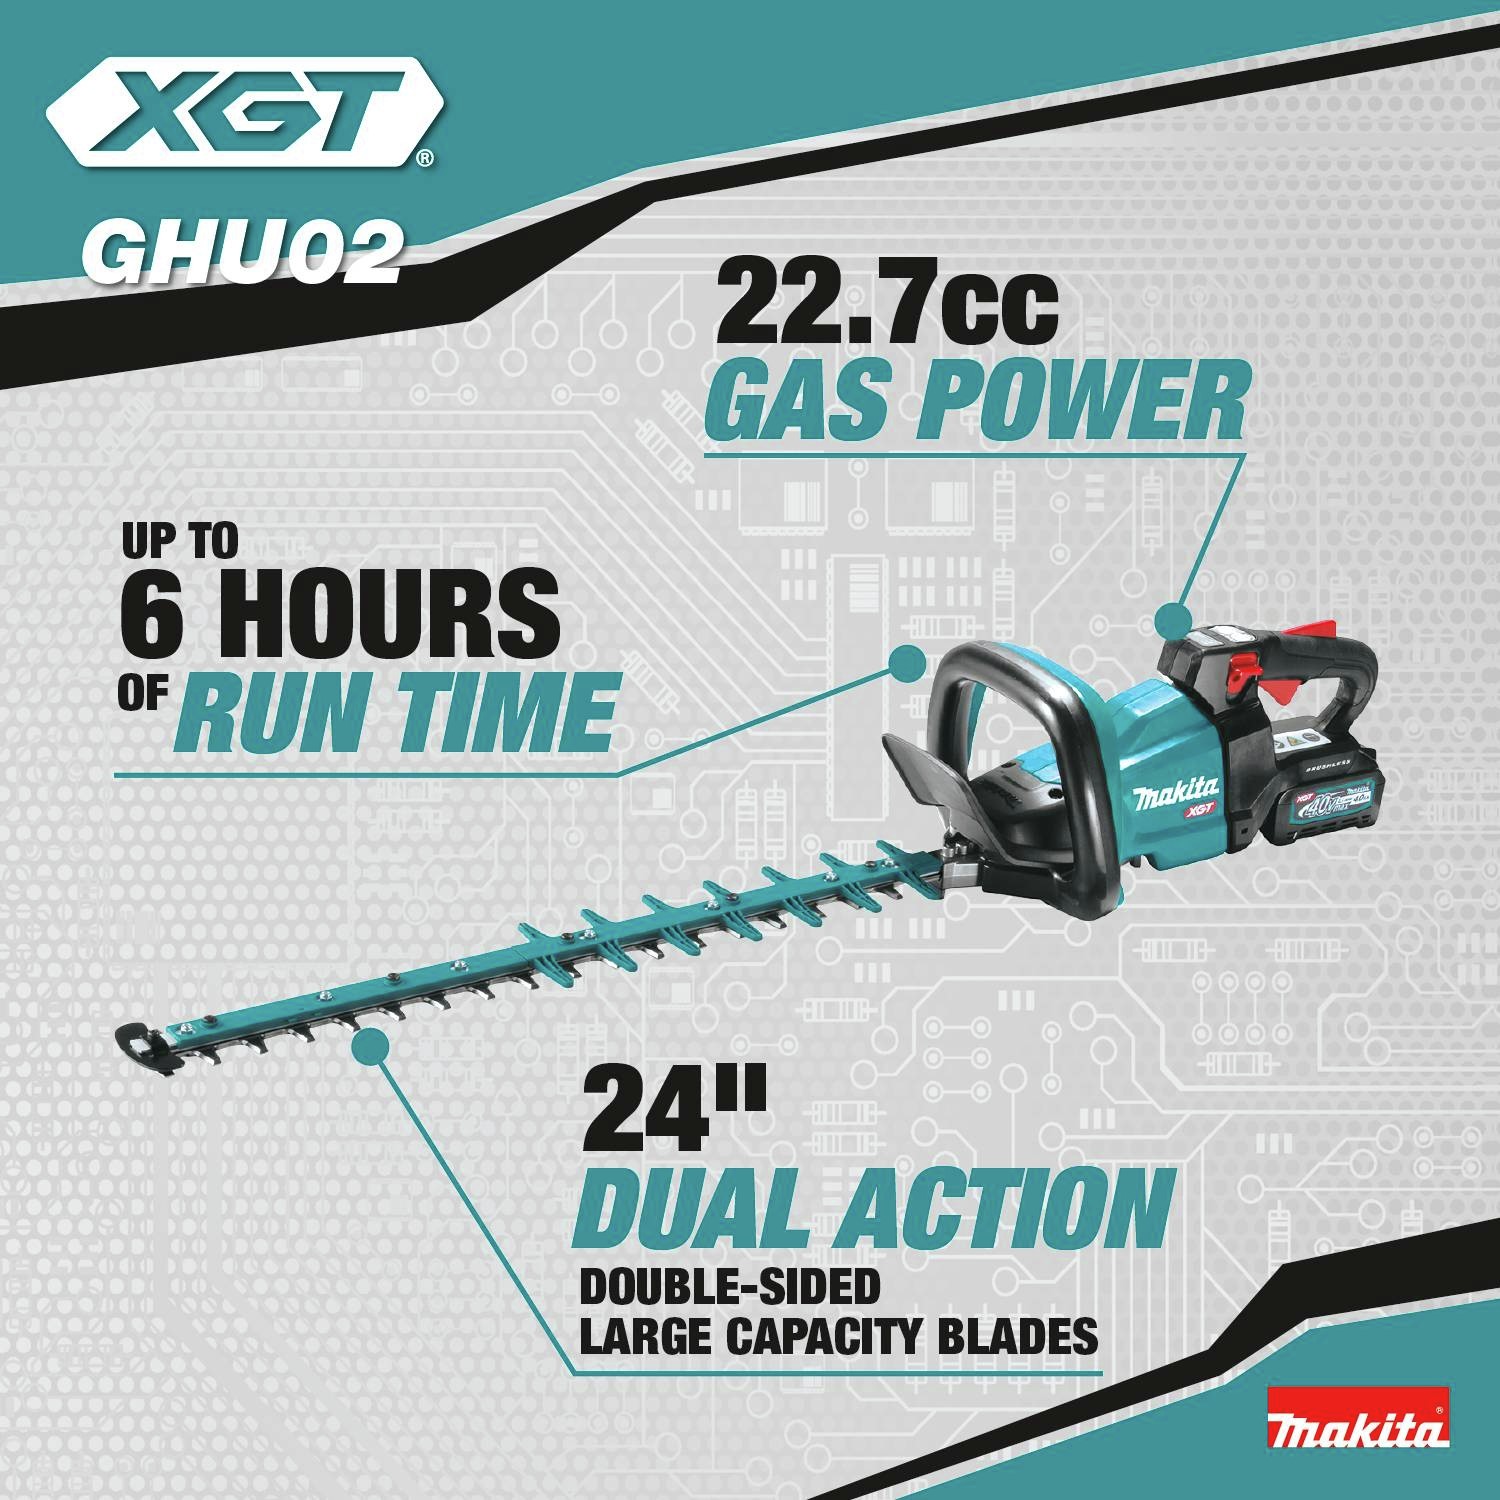 22.7cc gas power. Up to 6 hours of run time. 24 in. dual action, double-sided large capacity blades.